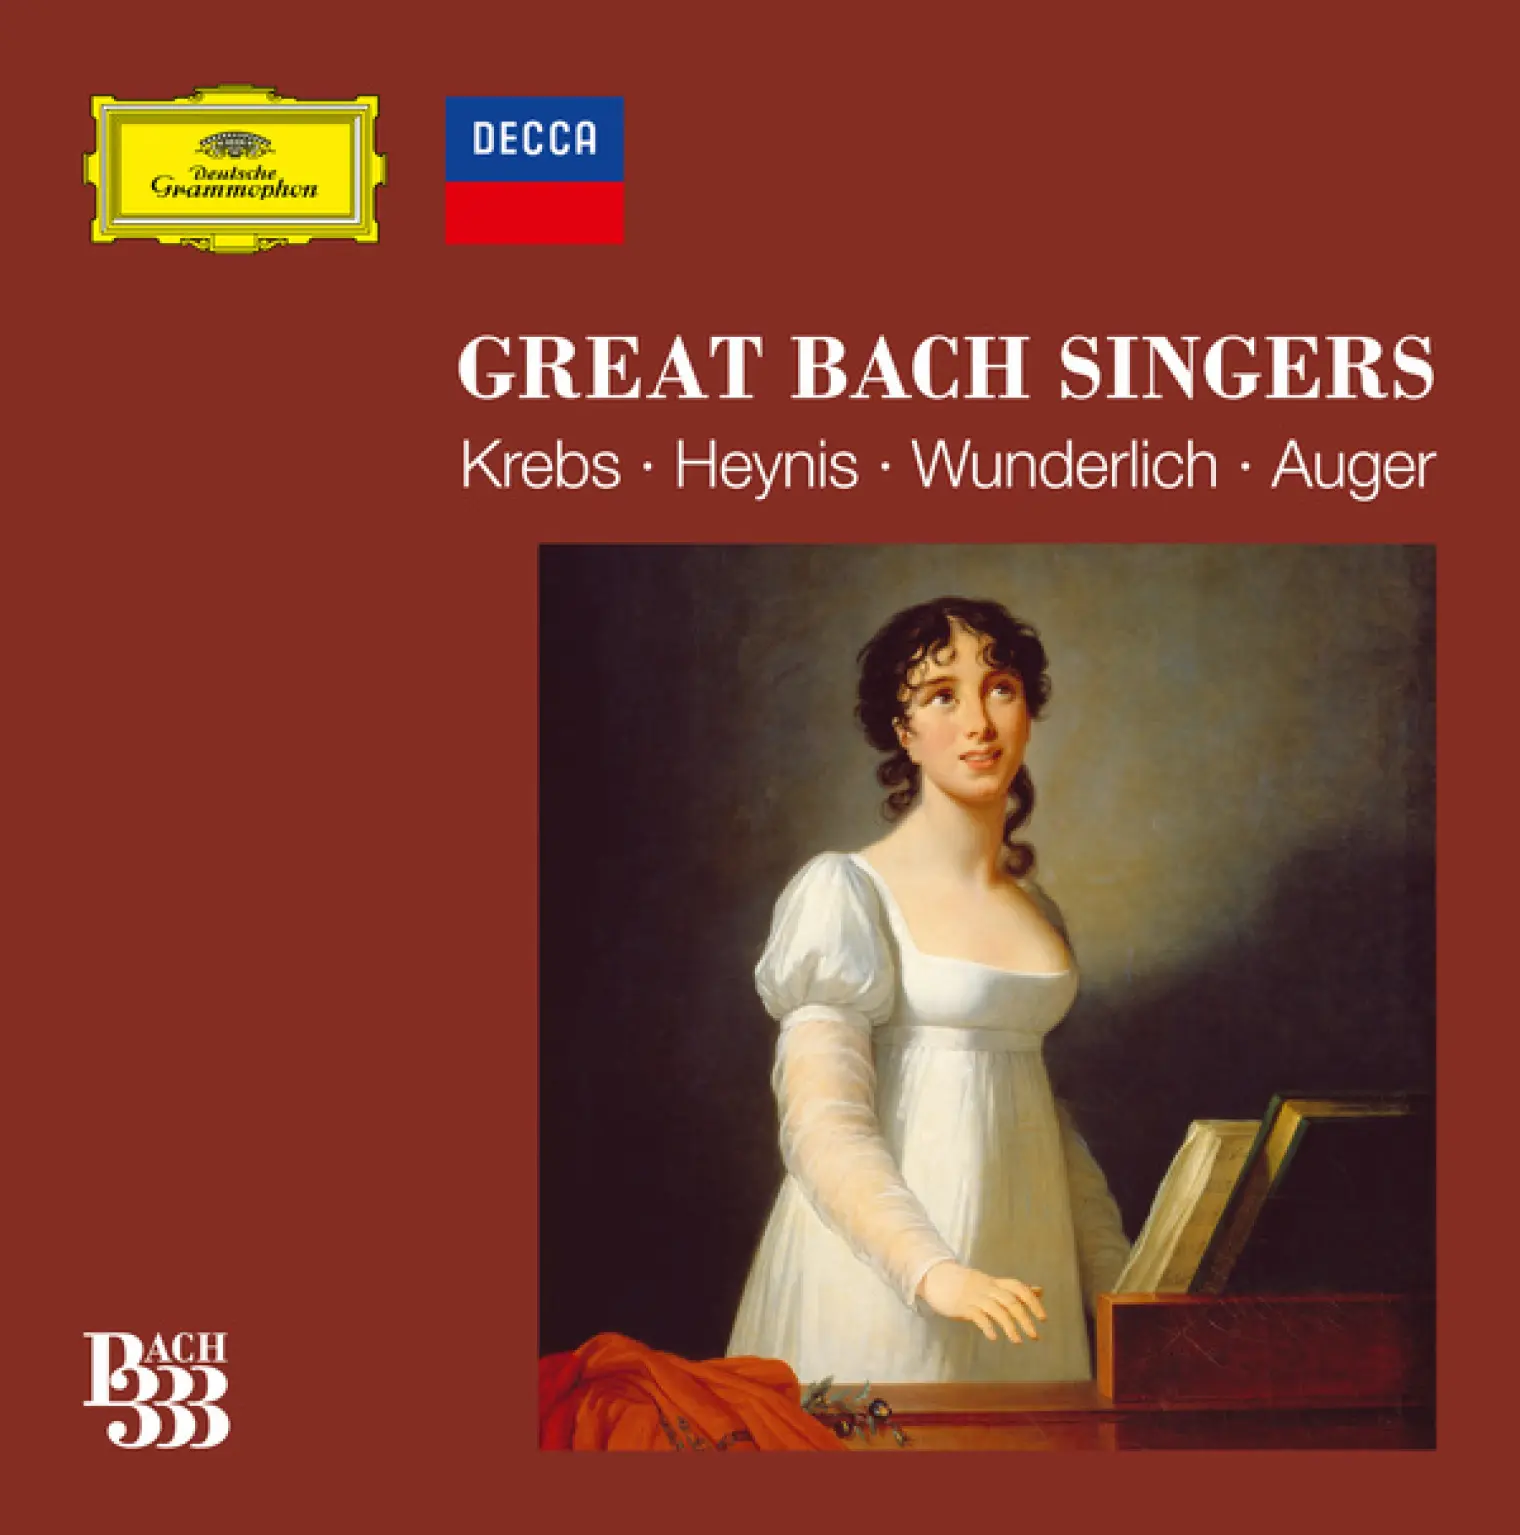 Bach 333: Great Bach Singers -  Various Artists 